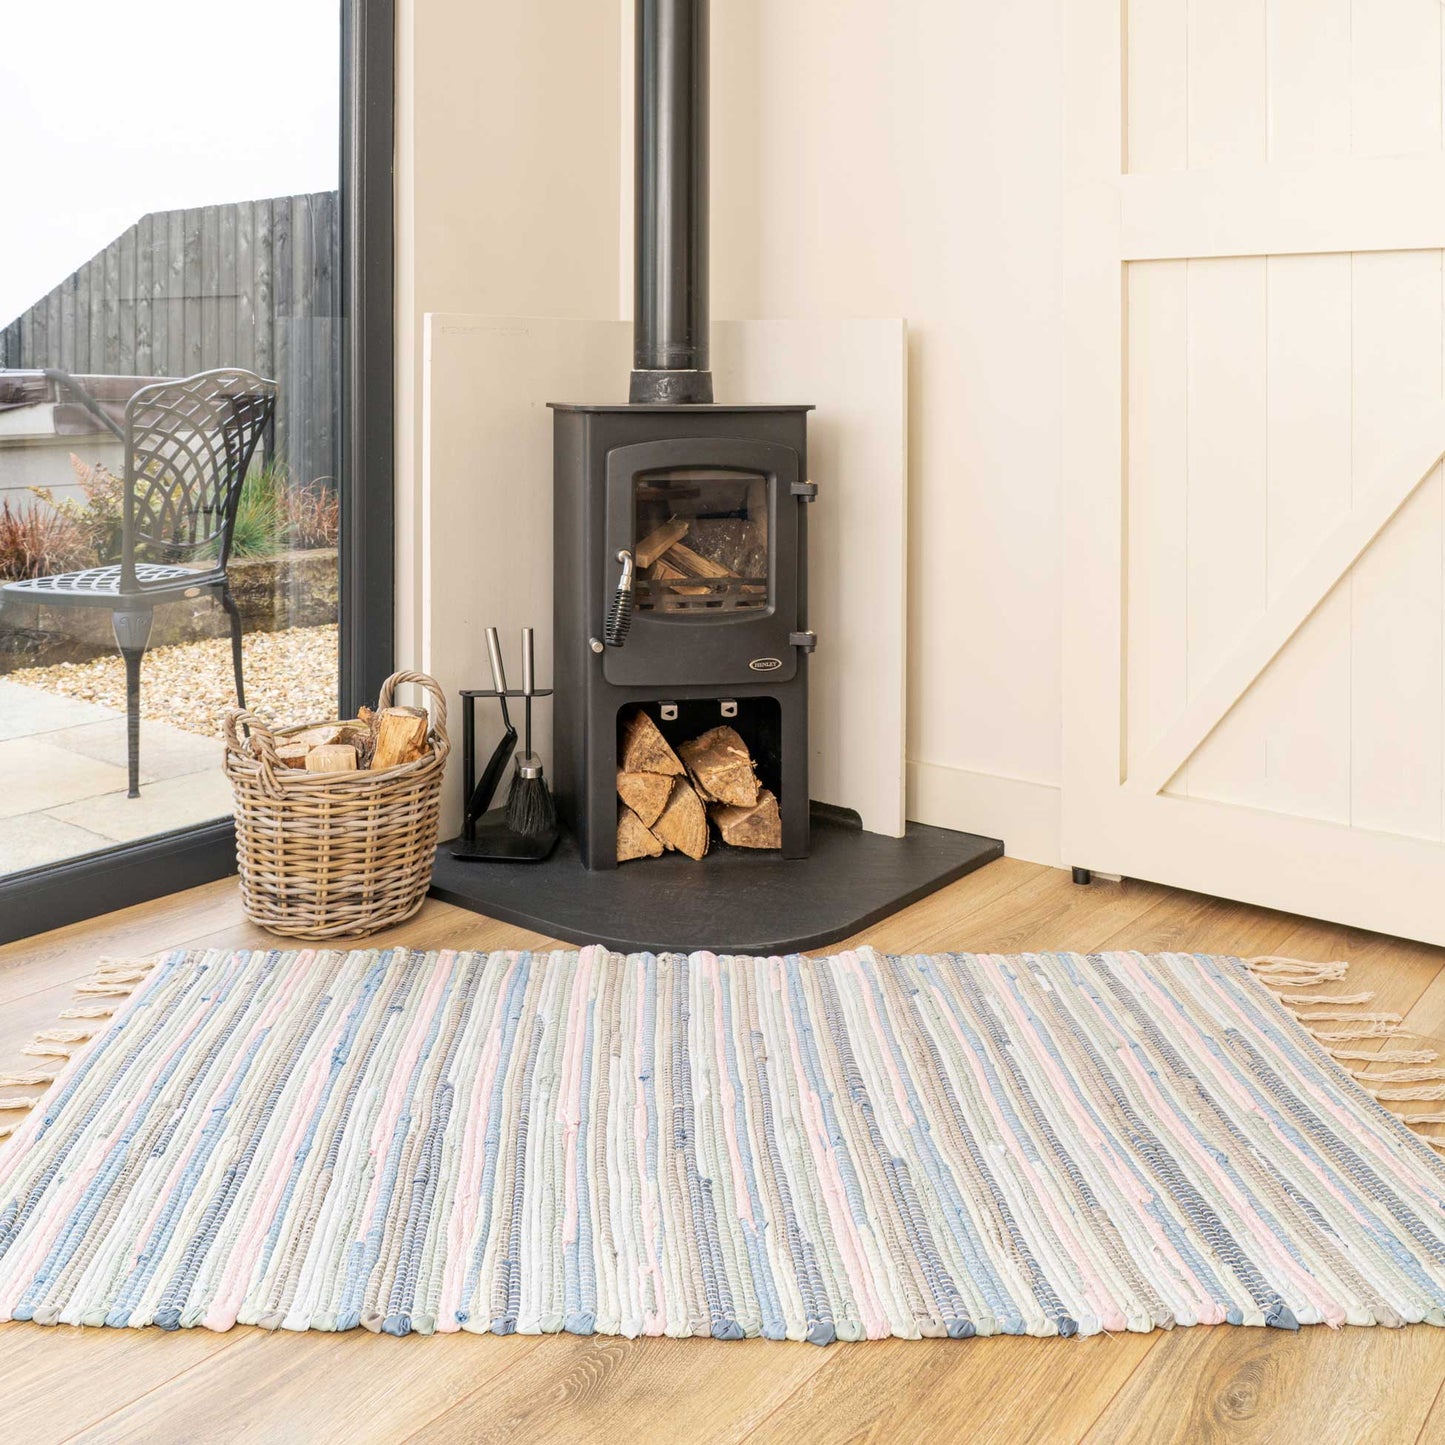 Natural Striped Recycled Cotton Rug